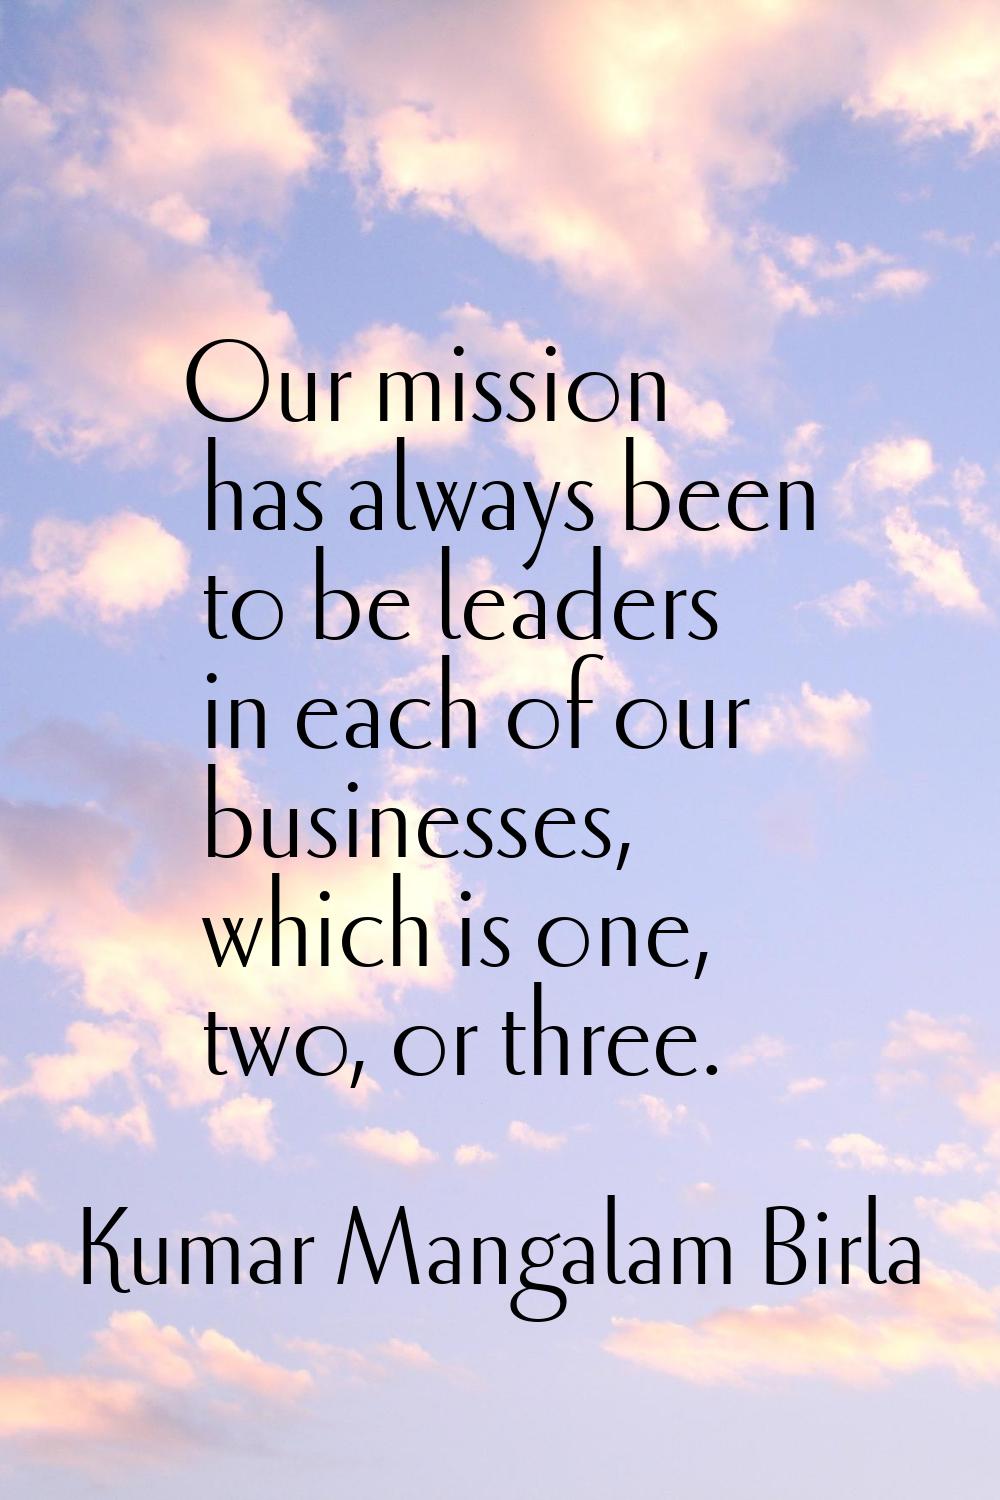 Our mission has always been to be leaders in each of our businesses, which is one, two, or three.